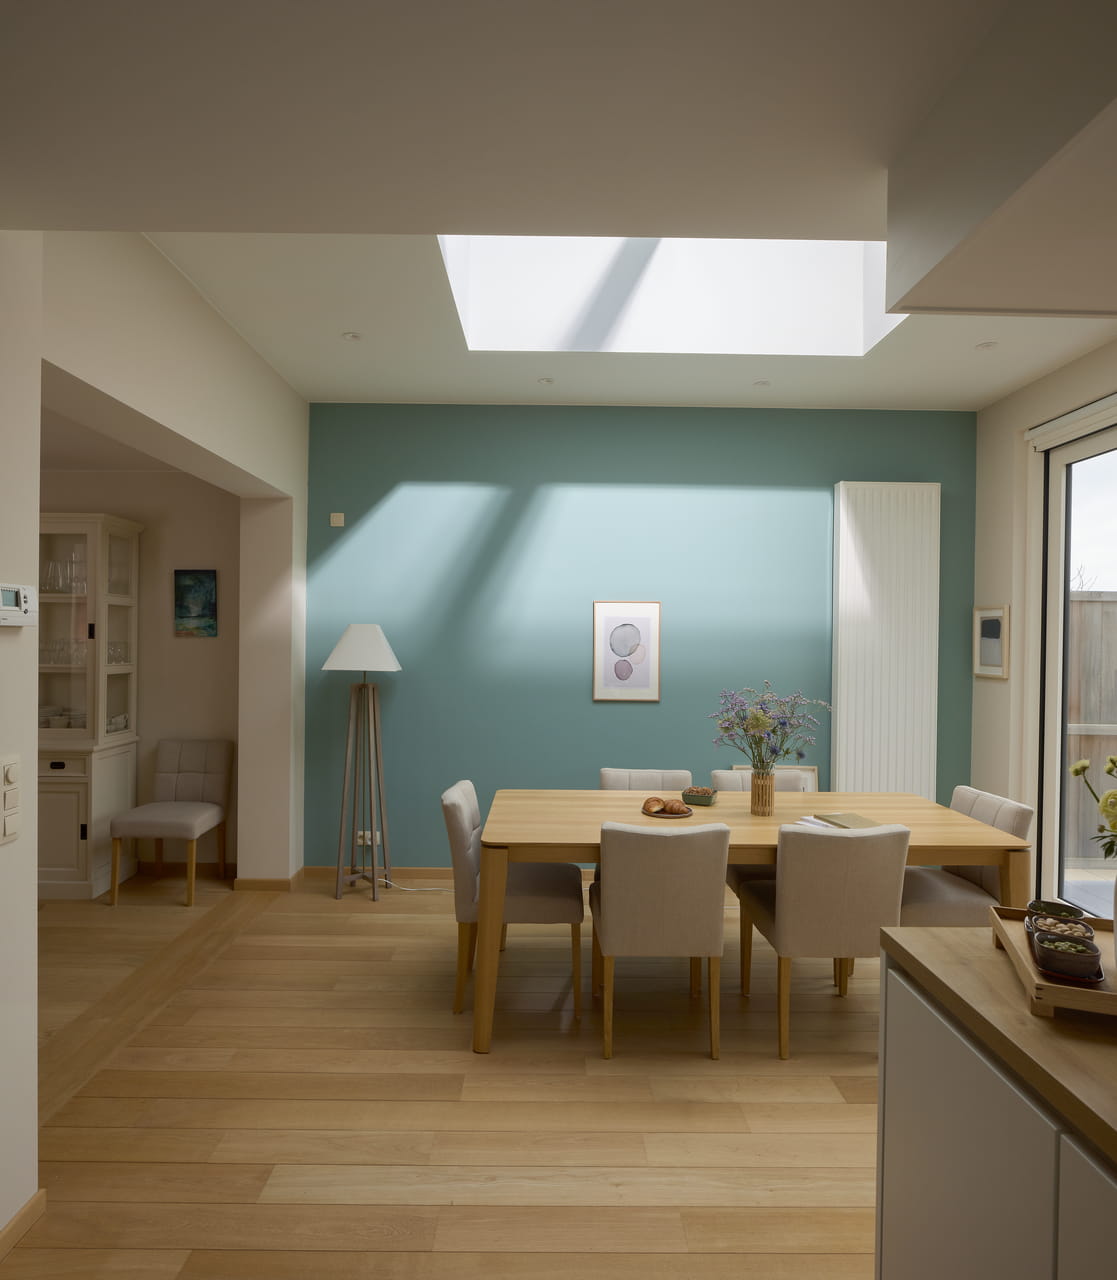 A modern kitchen and dining room with a big flat roof windows